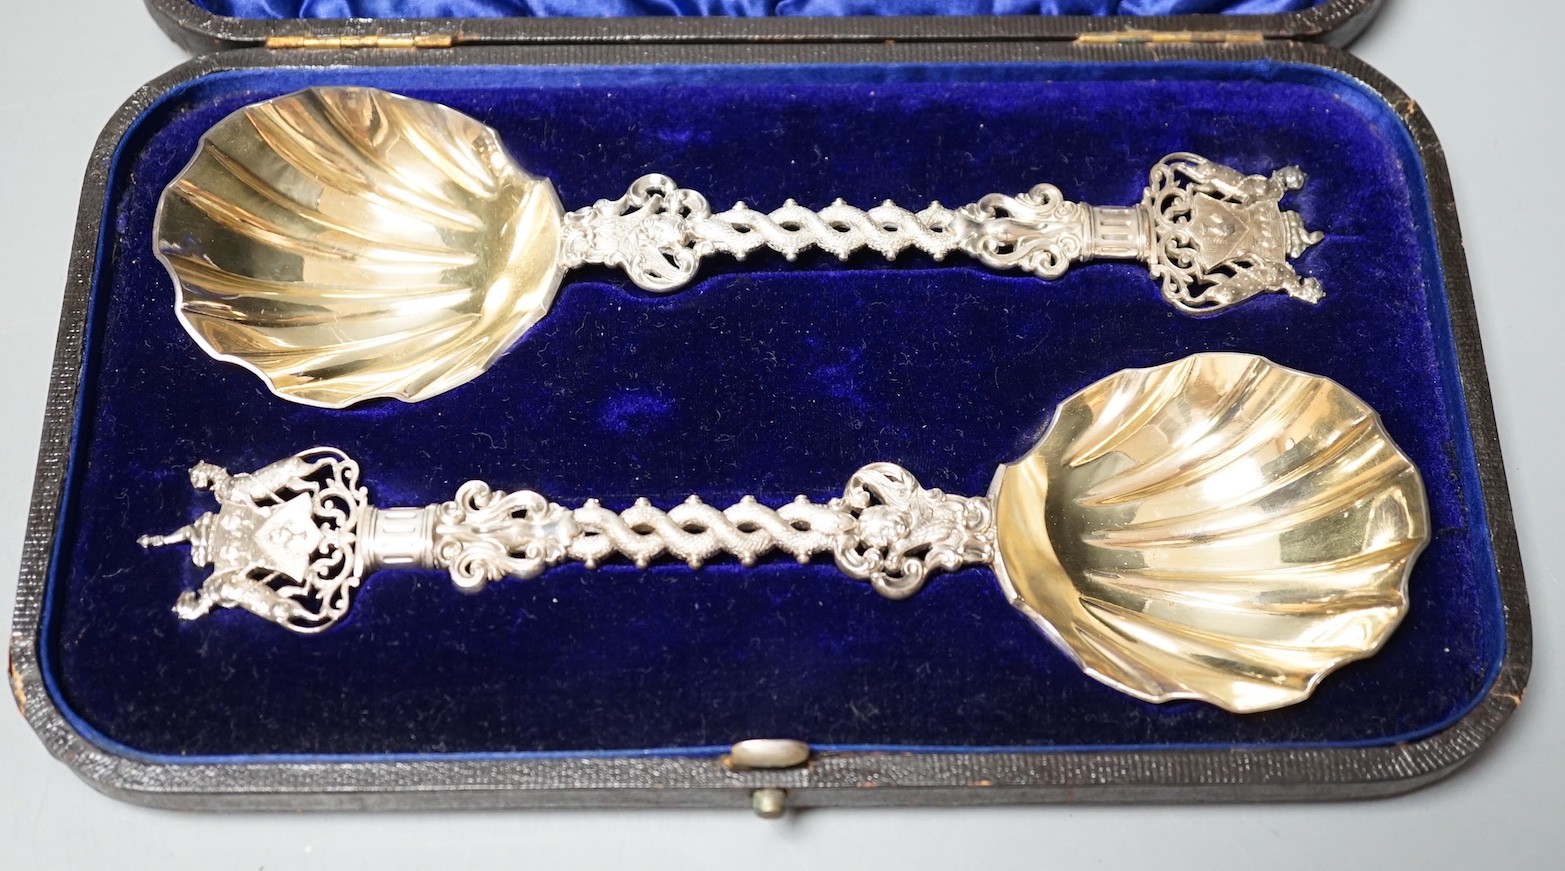 A cased pair of ornate late Victorian silver serving spoons, with entwined stems and terminals modelled as the crest of The Salter's Company, Francis Higgins III, London, 1894, 19.5cm, 5oz.